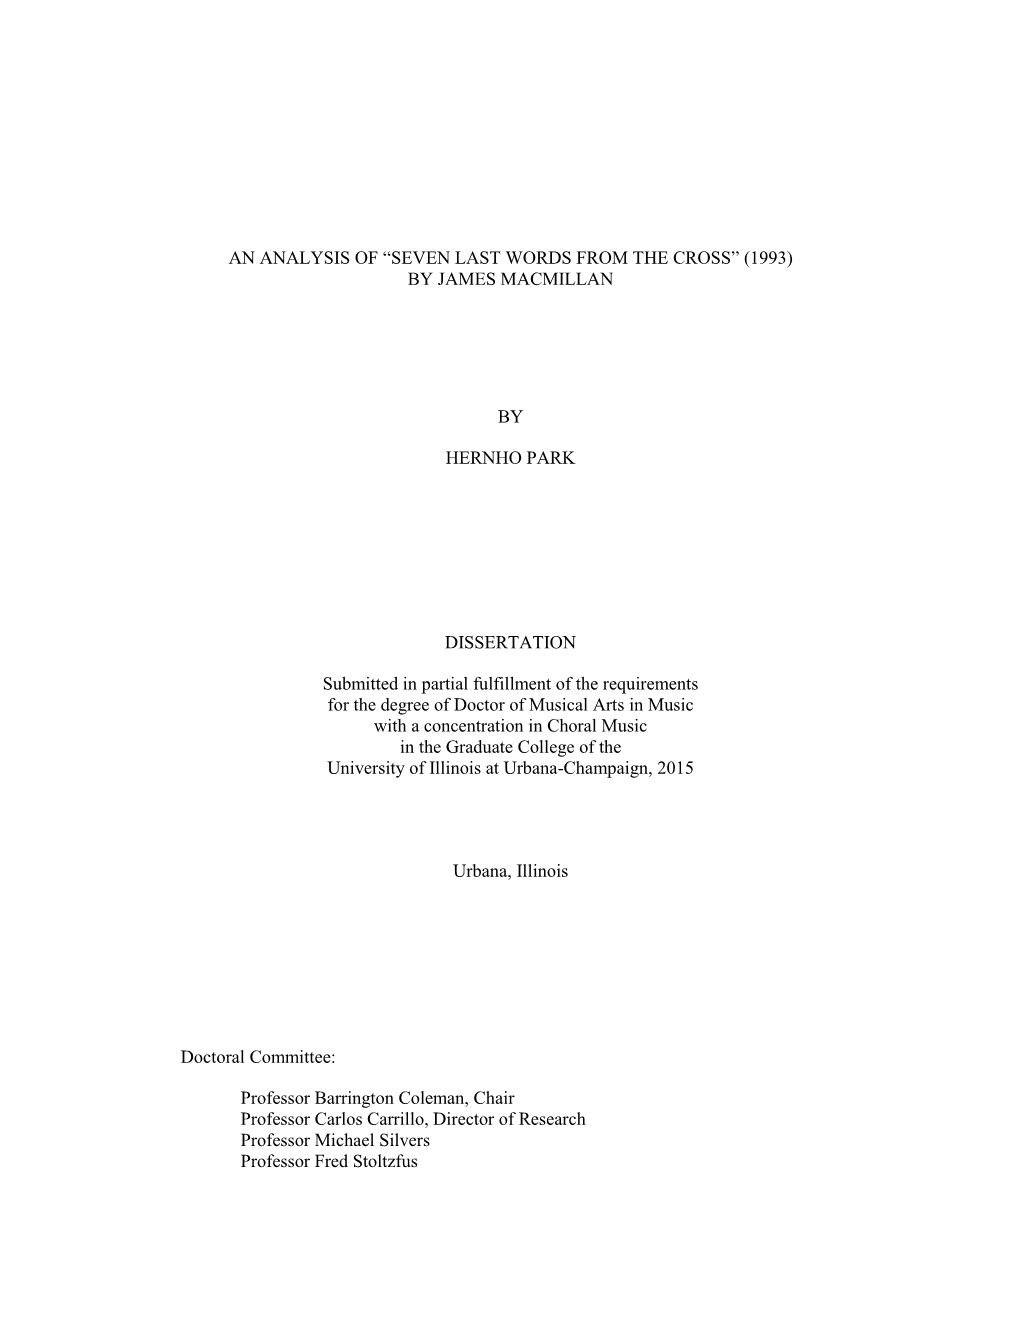 AN ANALYSIS of “SEVEN LAST WORDS from the CROSS” (1993) by JAMES MACMILLAN by HERNHO PARK DISSERTATION Submitted in Partial